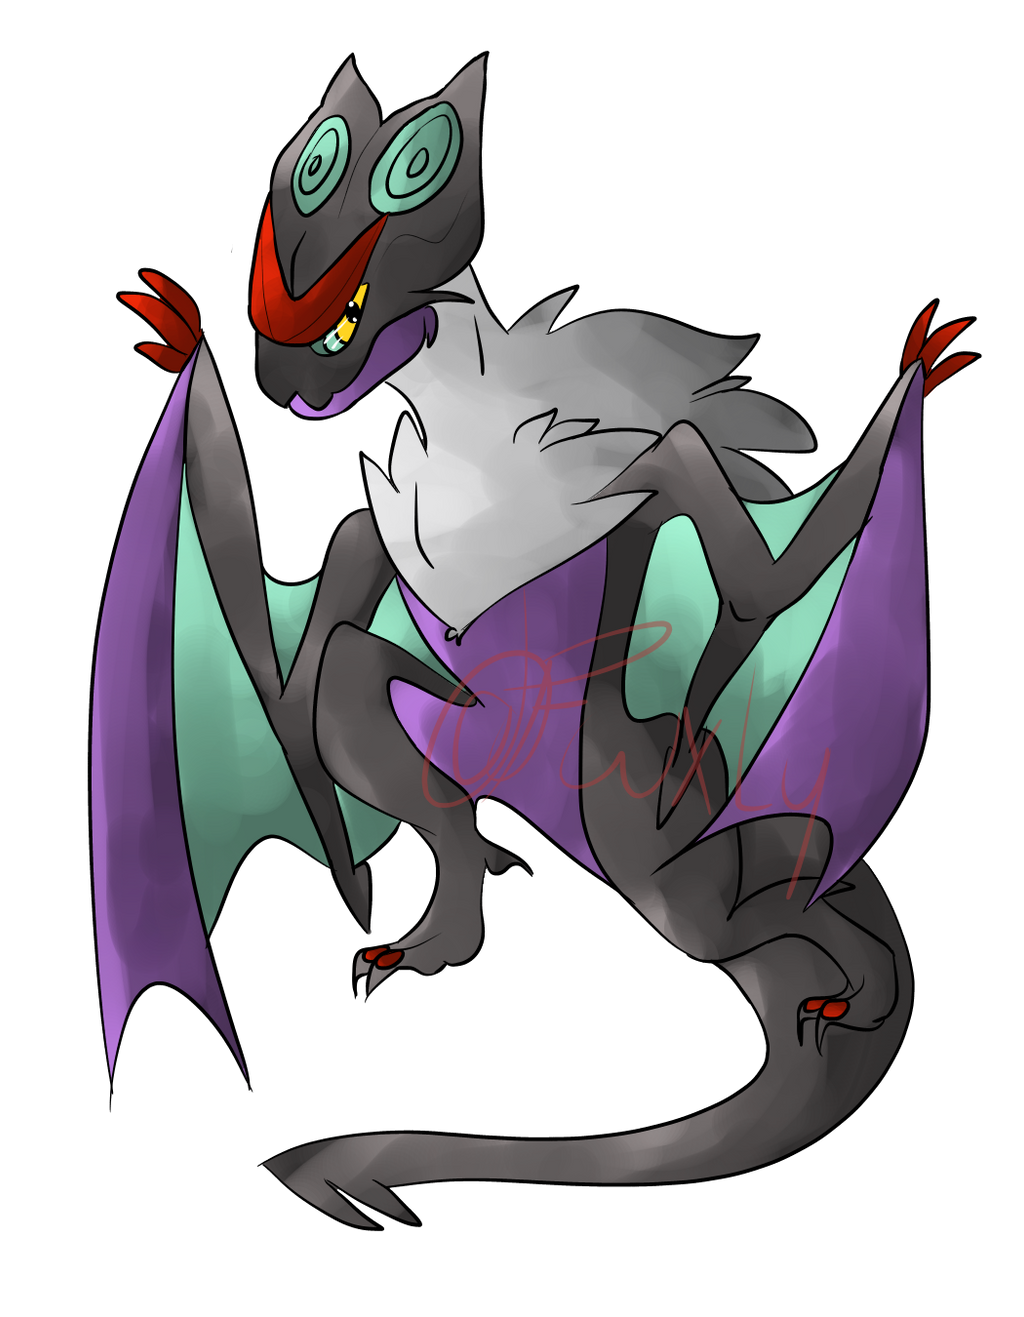 Noivern by DragamiArt on DeviantArt